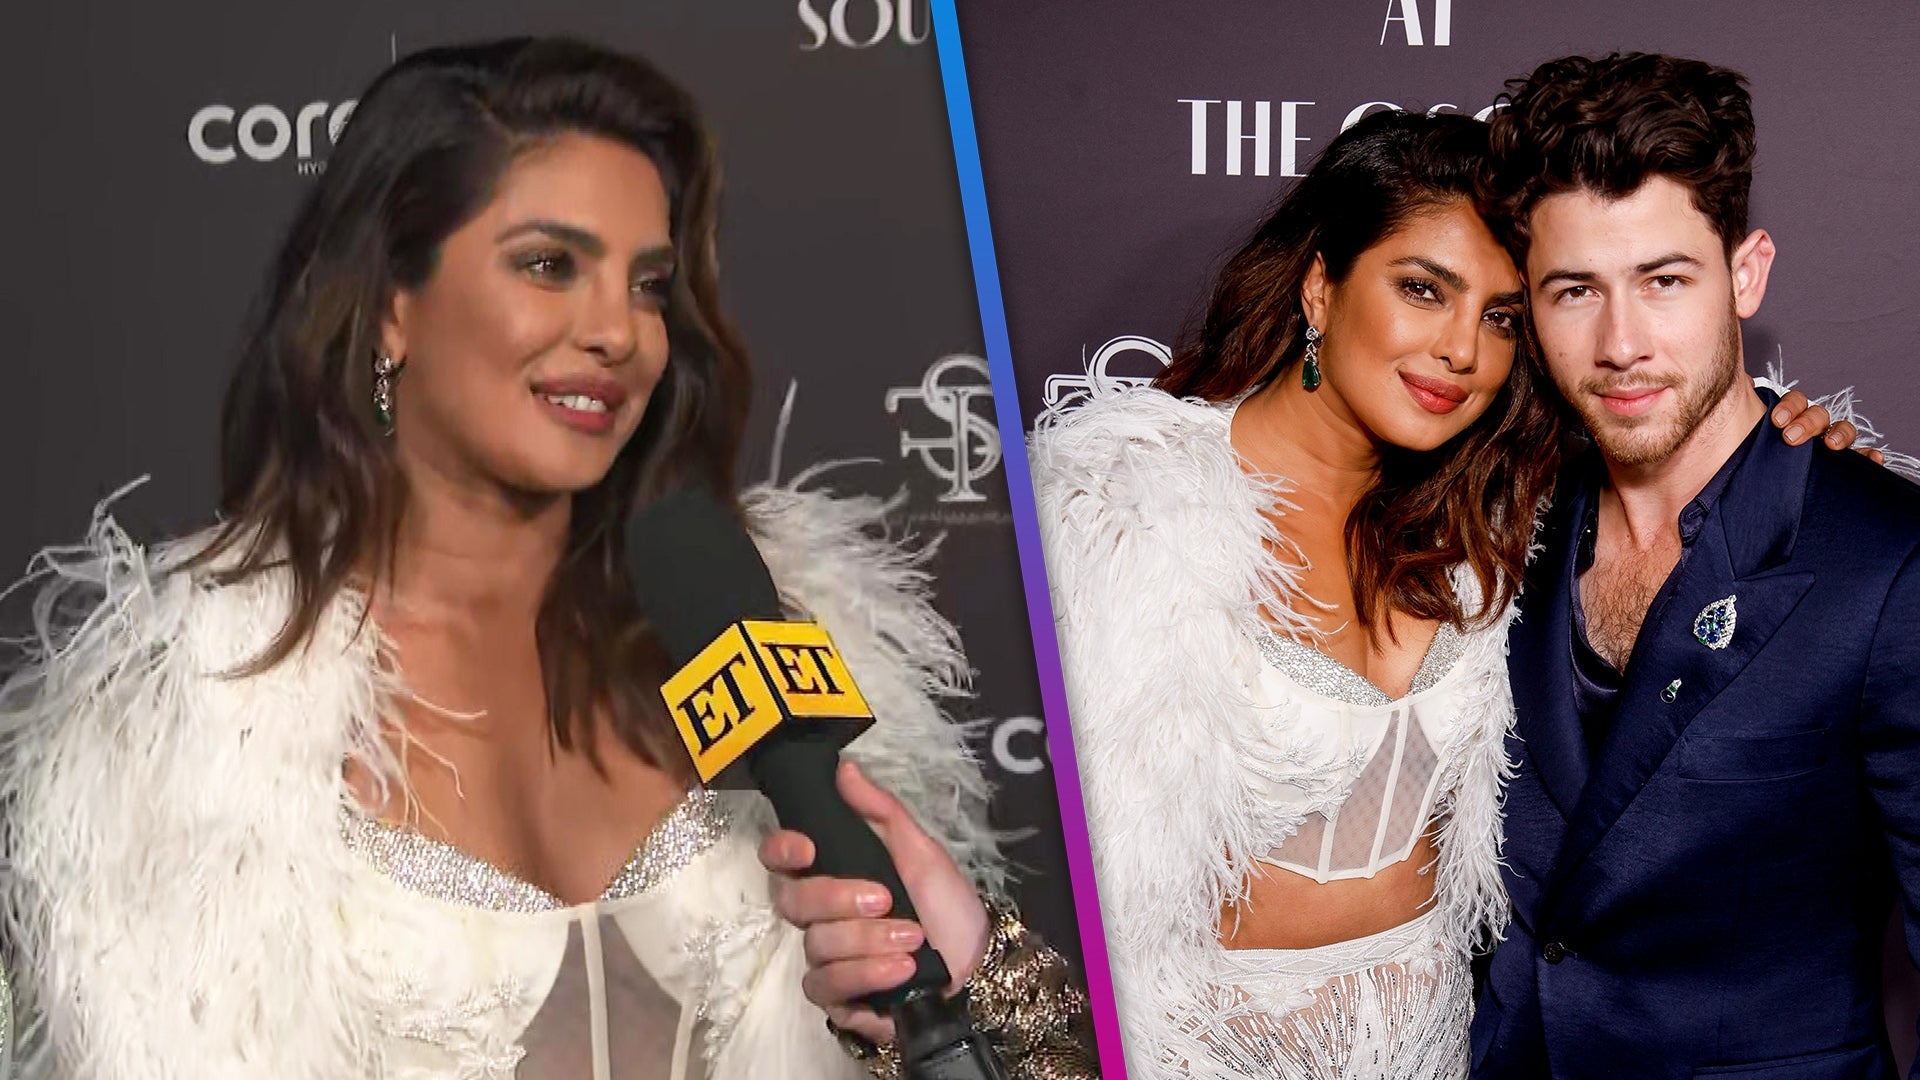 Priyanka Chopra on ‘Night Out’ With Hubby Nick Jonas and Close Bond With Mindy Kaling (Exclusive) 